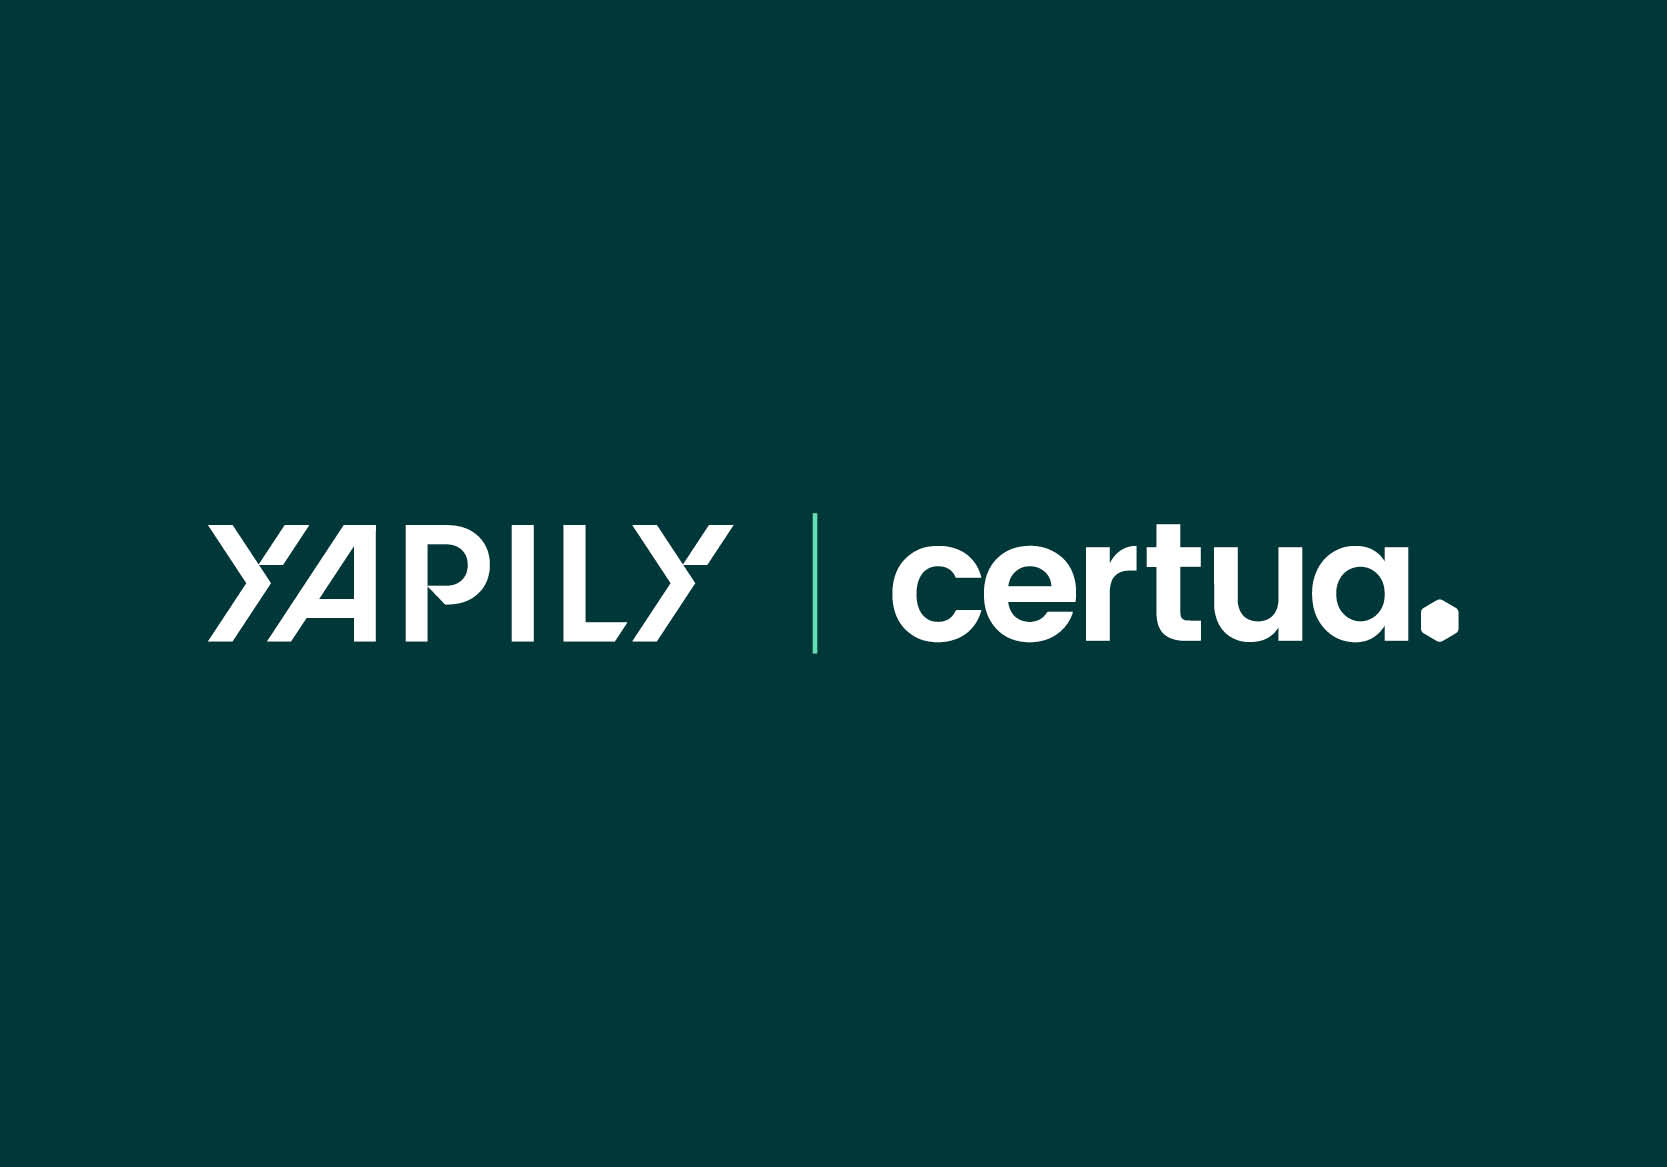 Yapily and Certua team up to simplify life insurance with open banking
